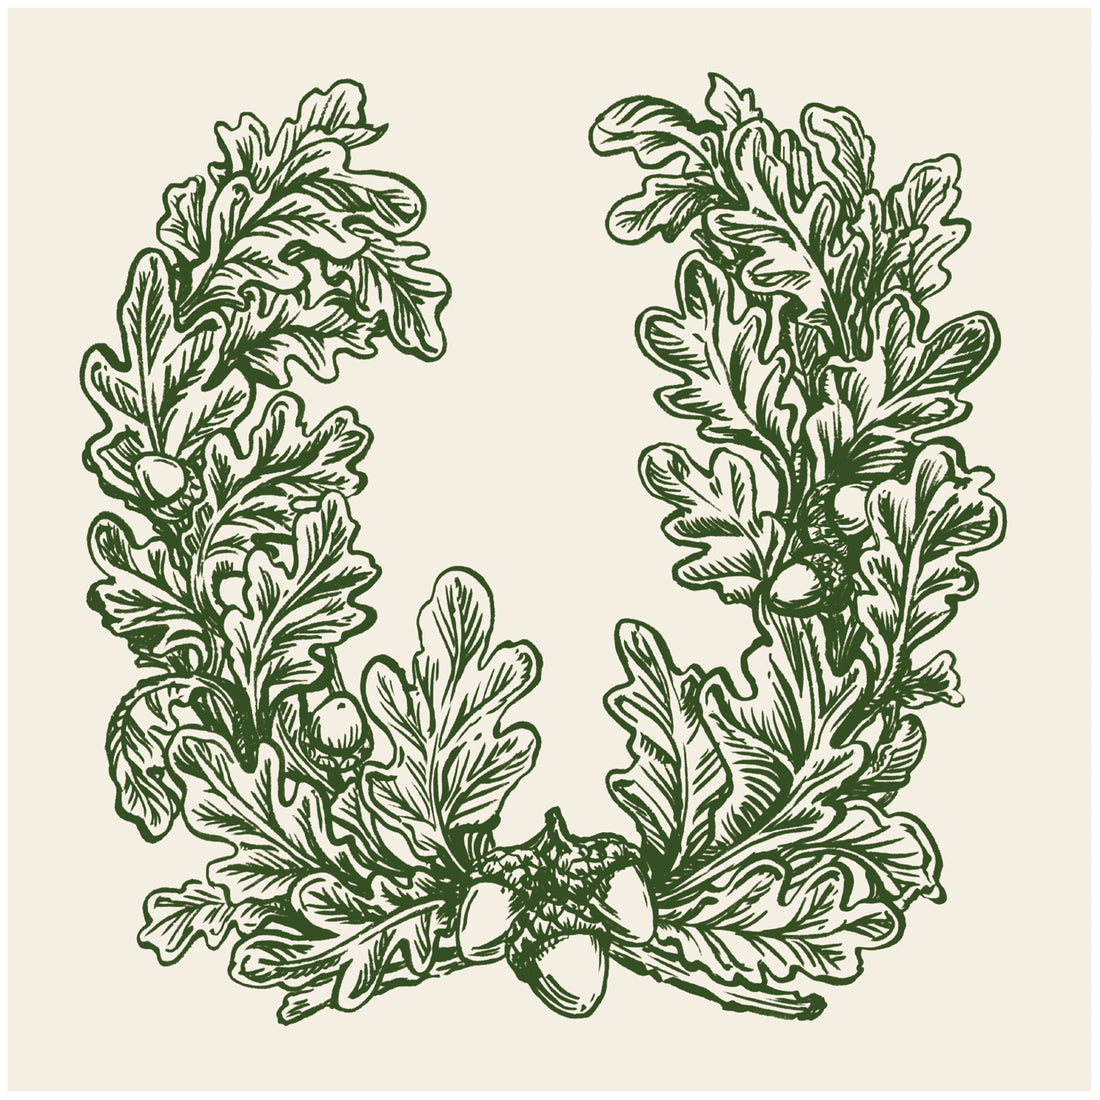 A square, white cocktail napkin featuring a dark green engraving-style illustration of two leafy oak branches with acorns, crossed at the bottom and arching into an open wreath.